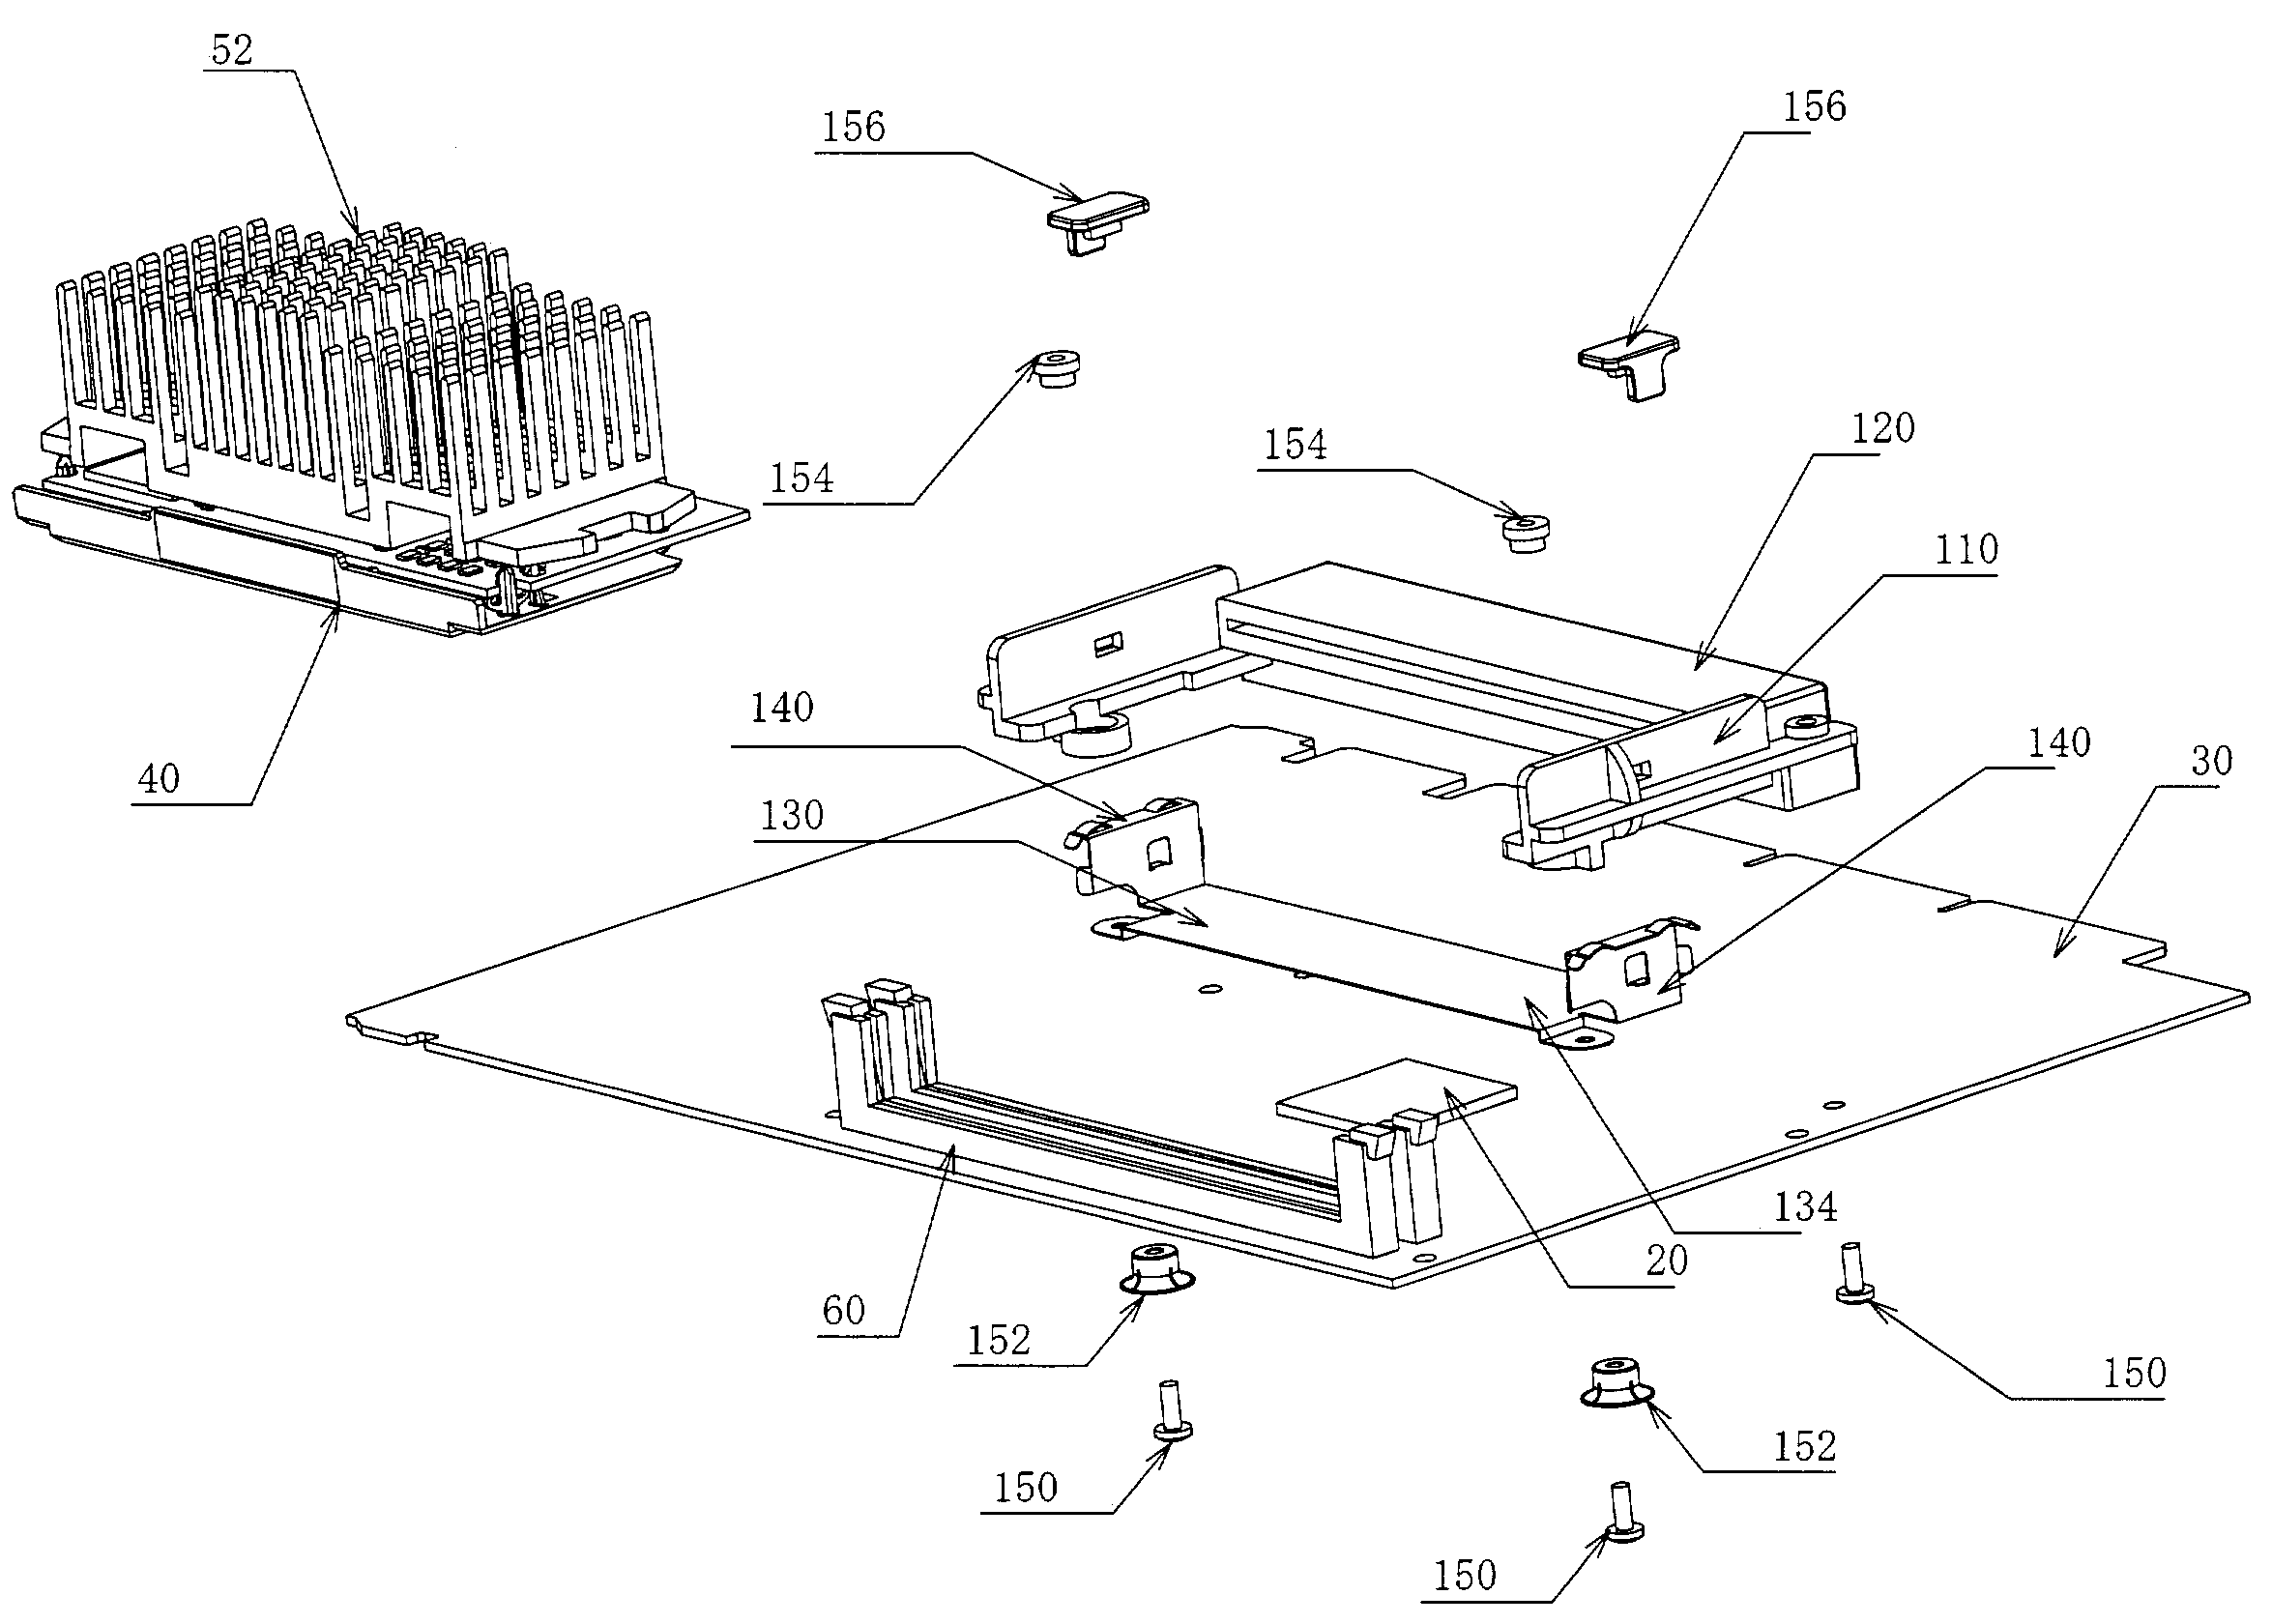 Retention module, heat sink and electronic device